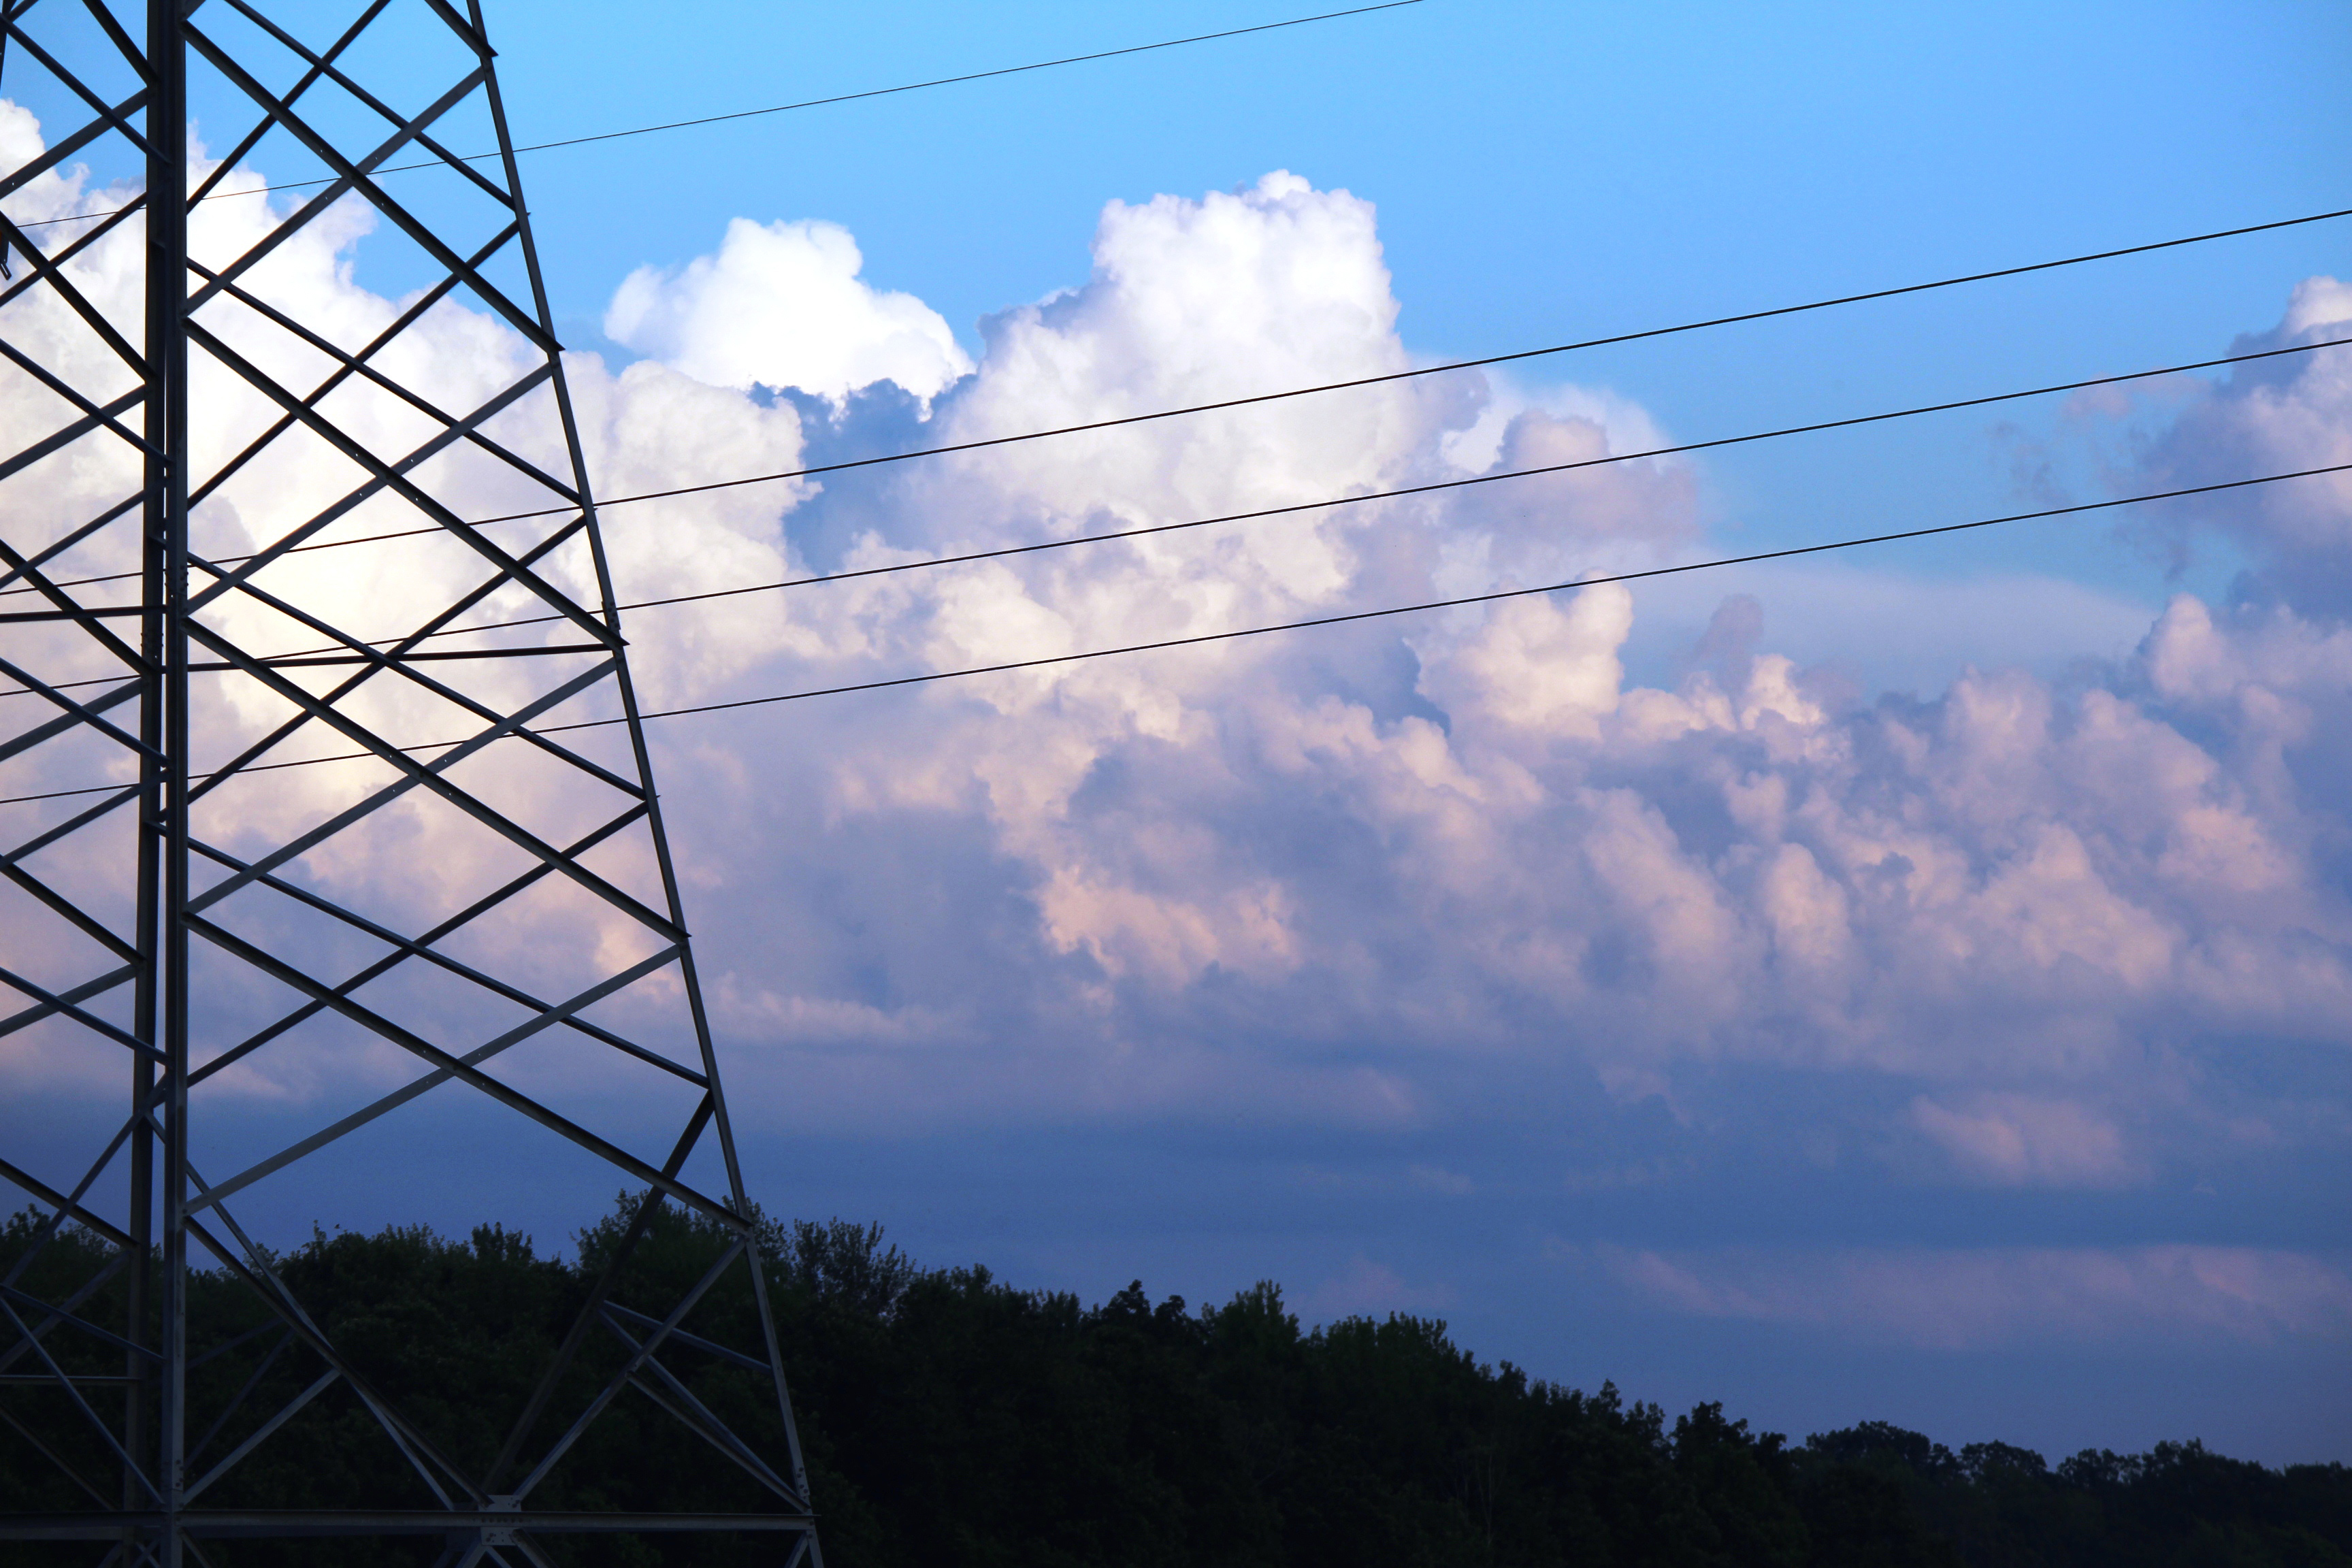 Image of a transmission station with the sky in the background